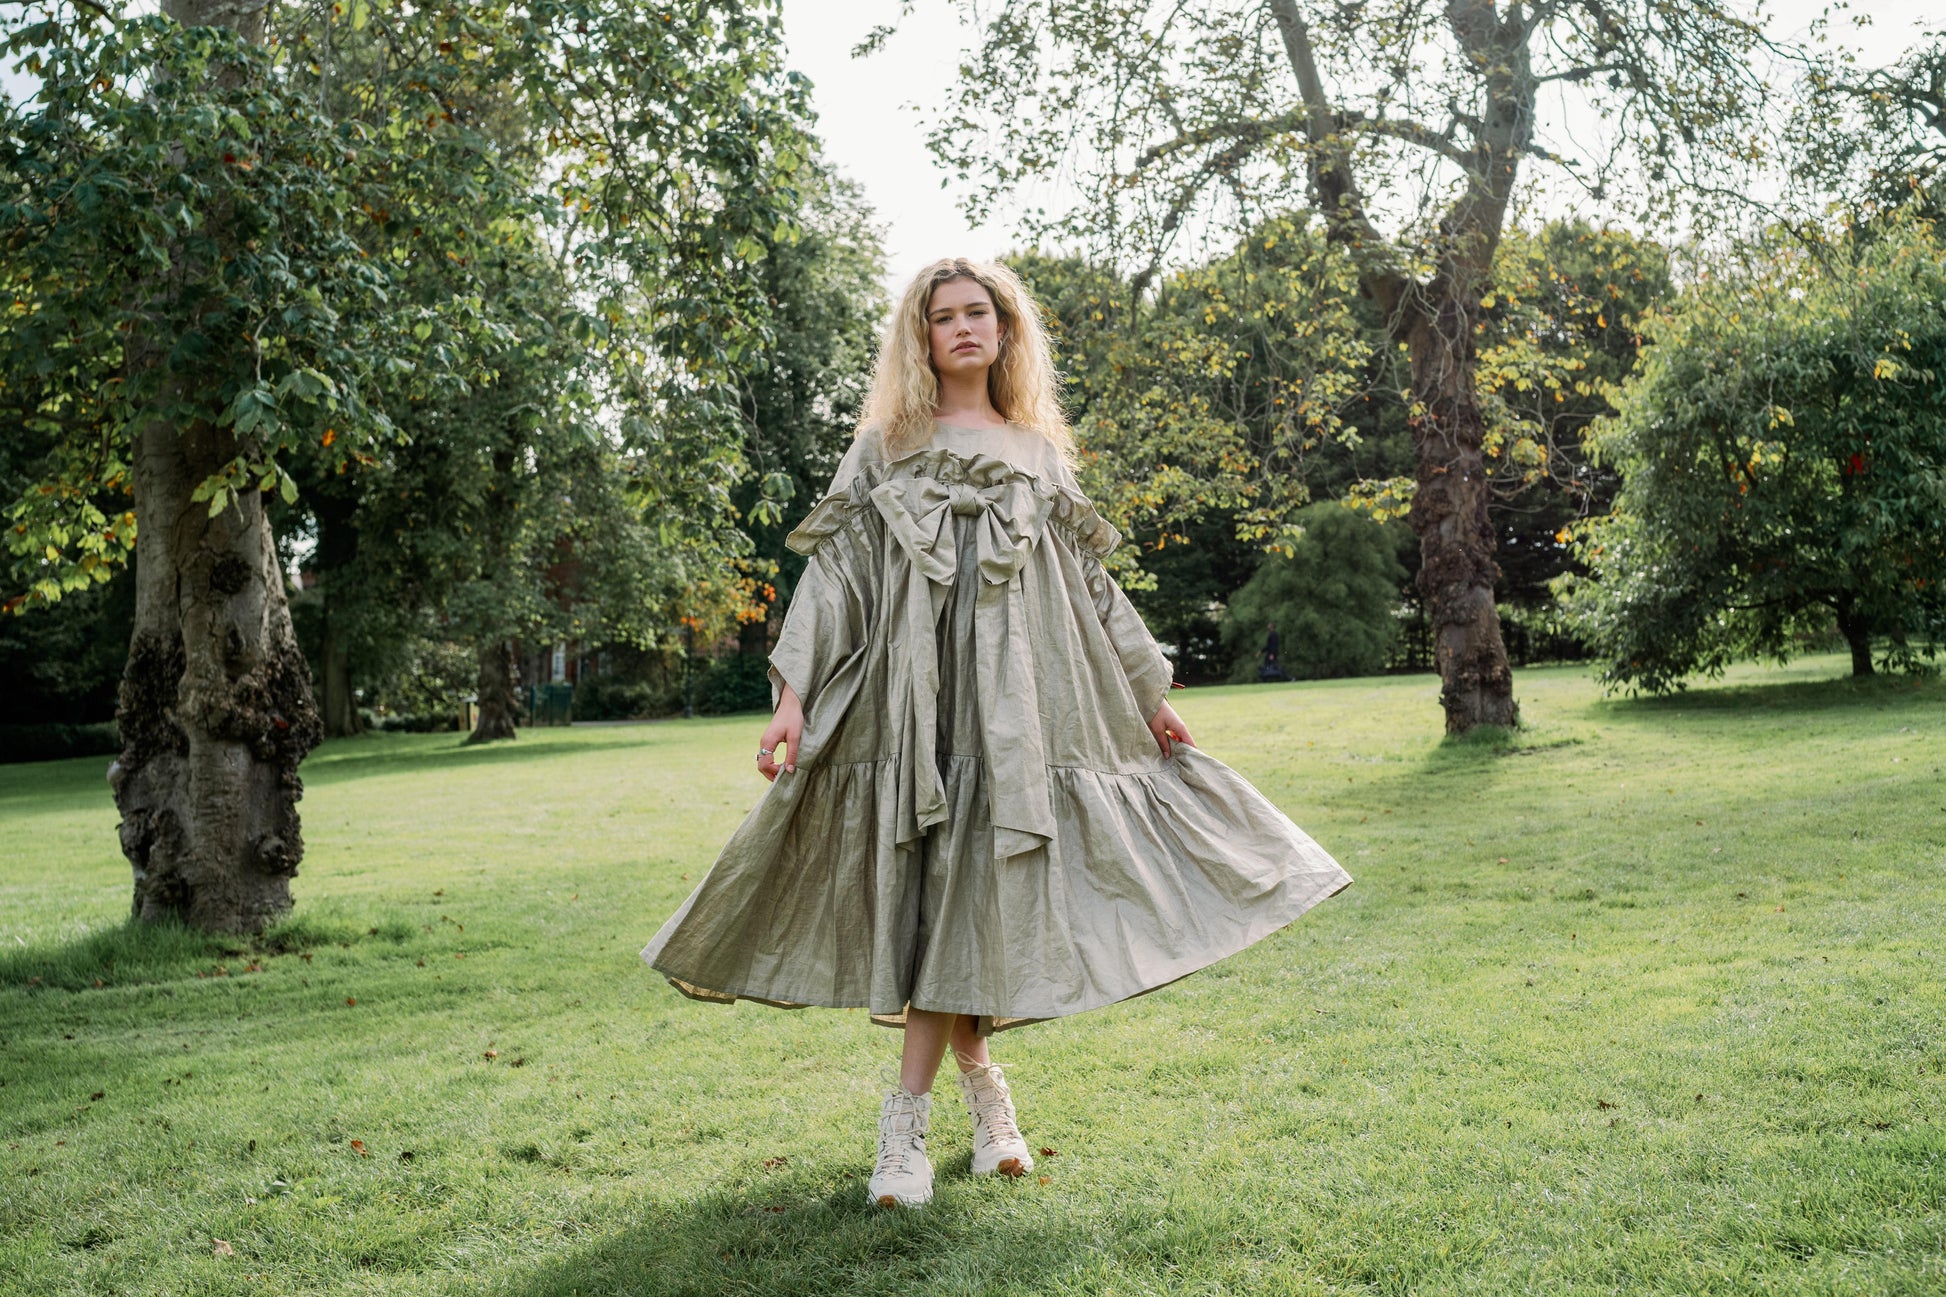 BOW DRESS | A new shape for AW23, The Bow Dress is one of our most playful. The dress is an oversized shape with gathered tiered details. The frill and bow detail at the front is the show-stopper. We have created this one in a beige/gold beetled linen whi